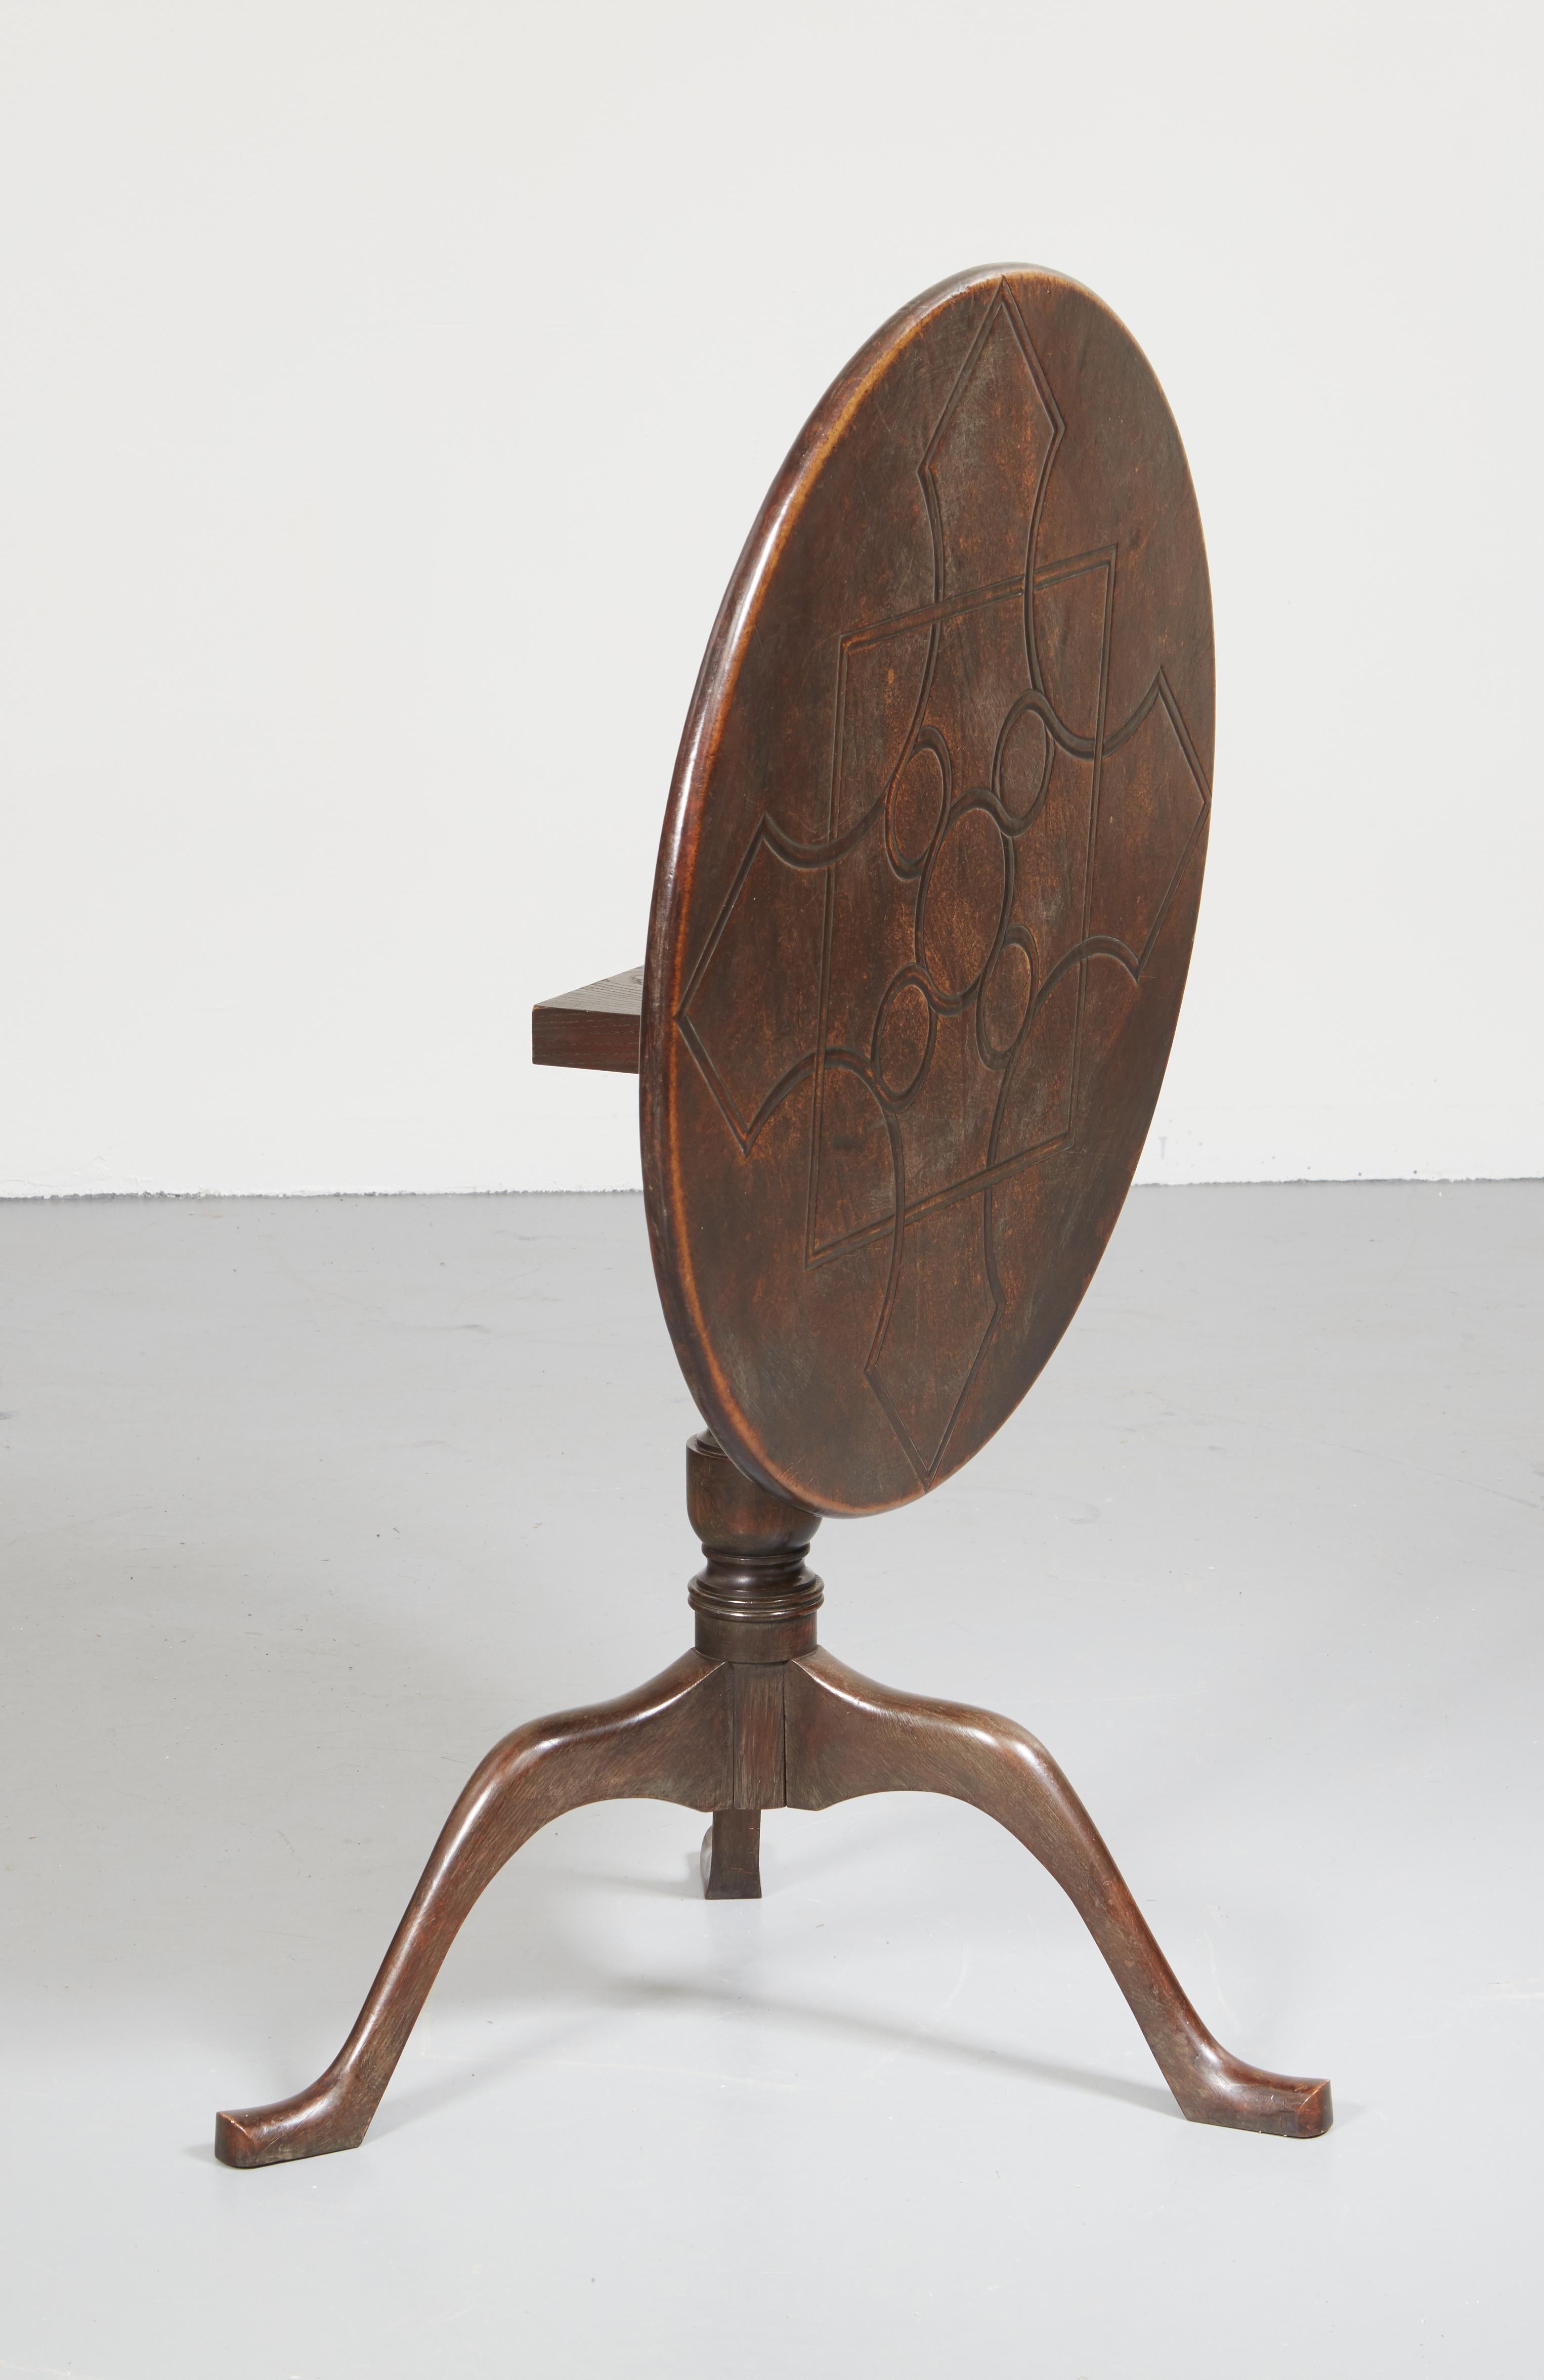 Very Unusual English Leather Clad Round Tripod Table 1